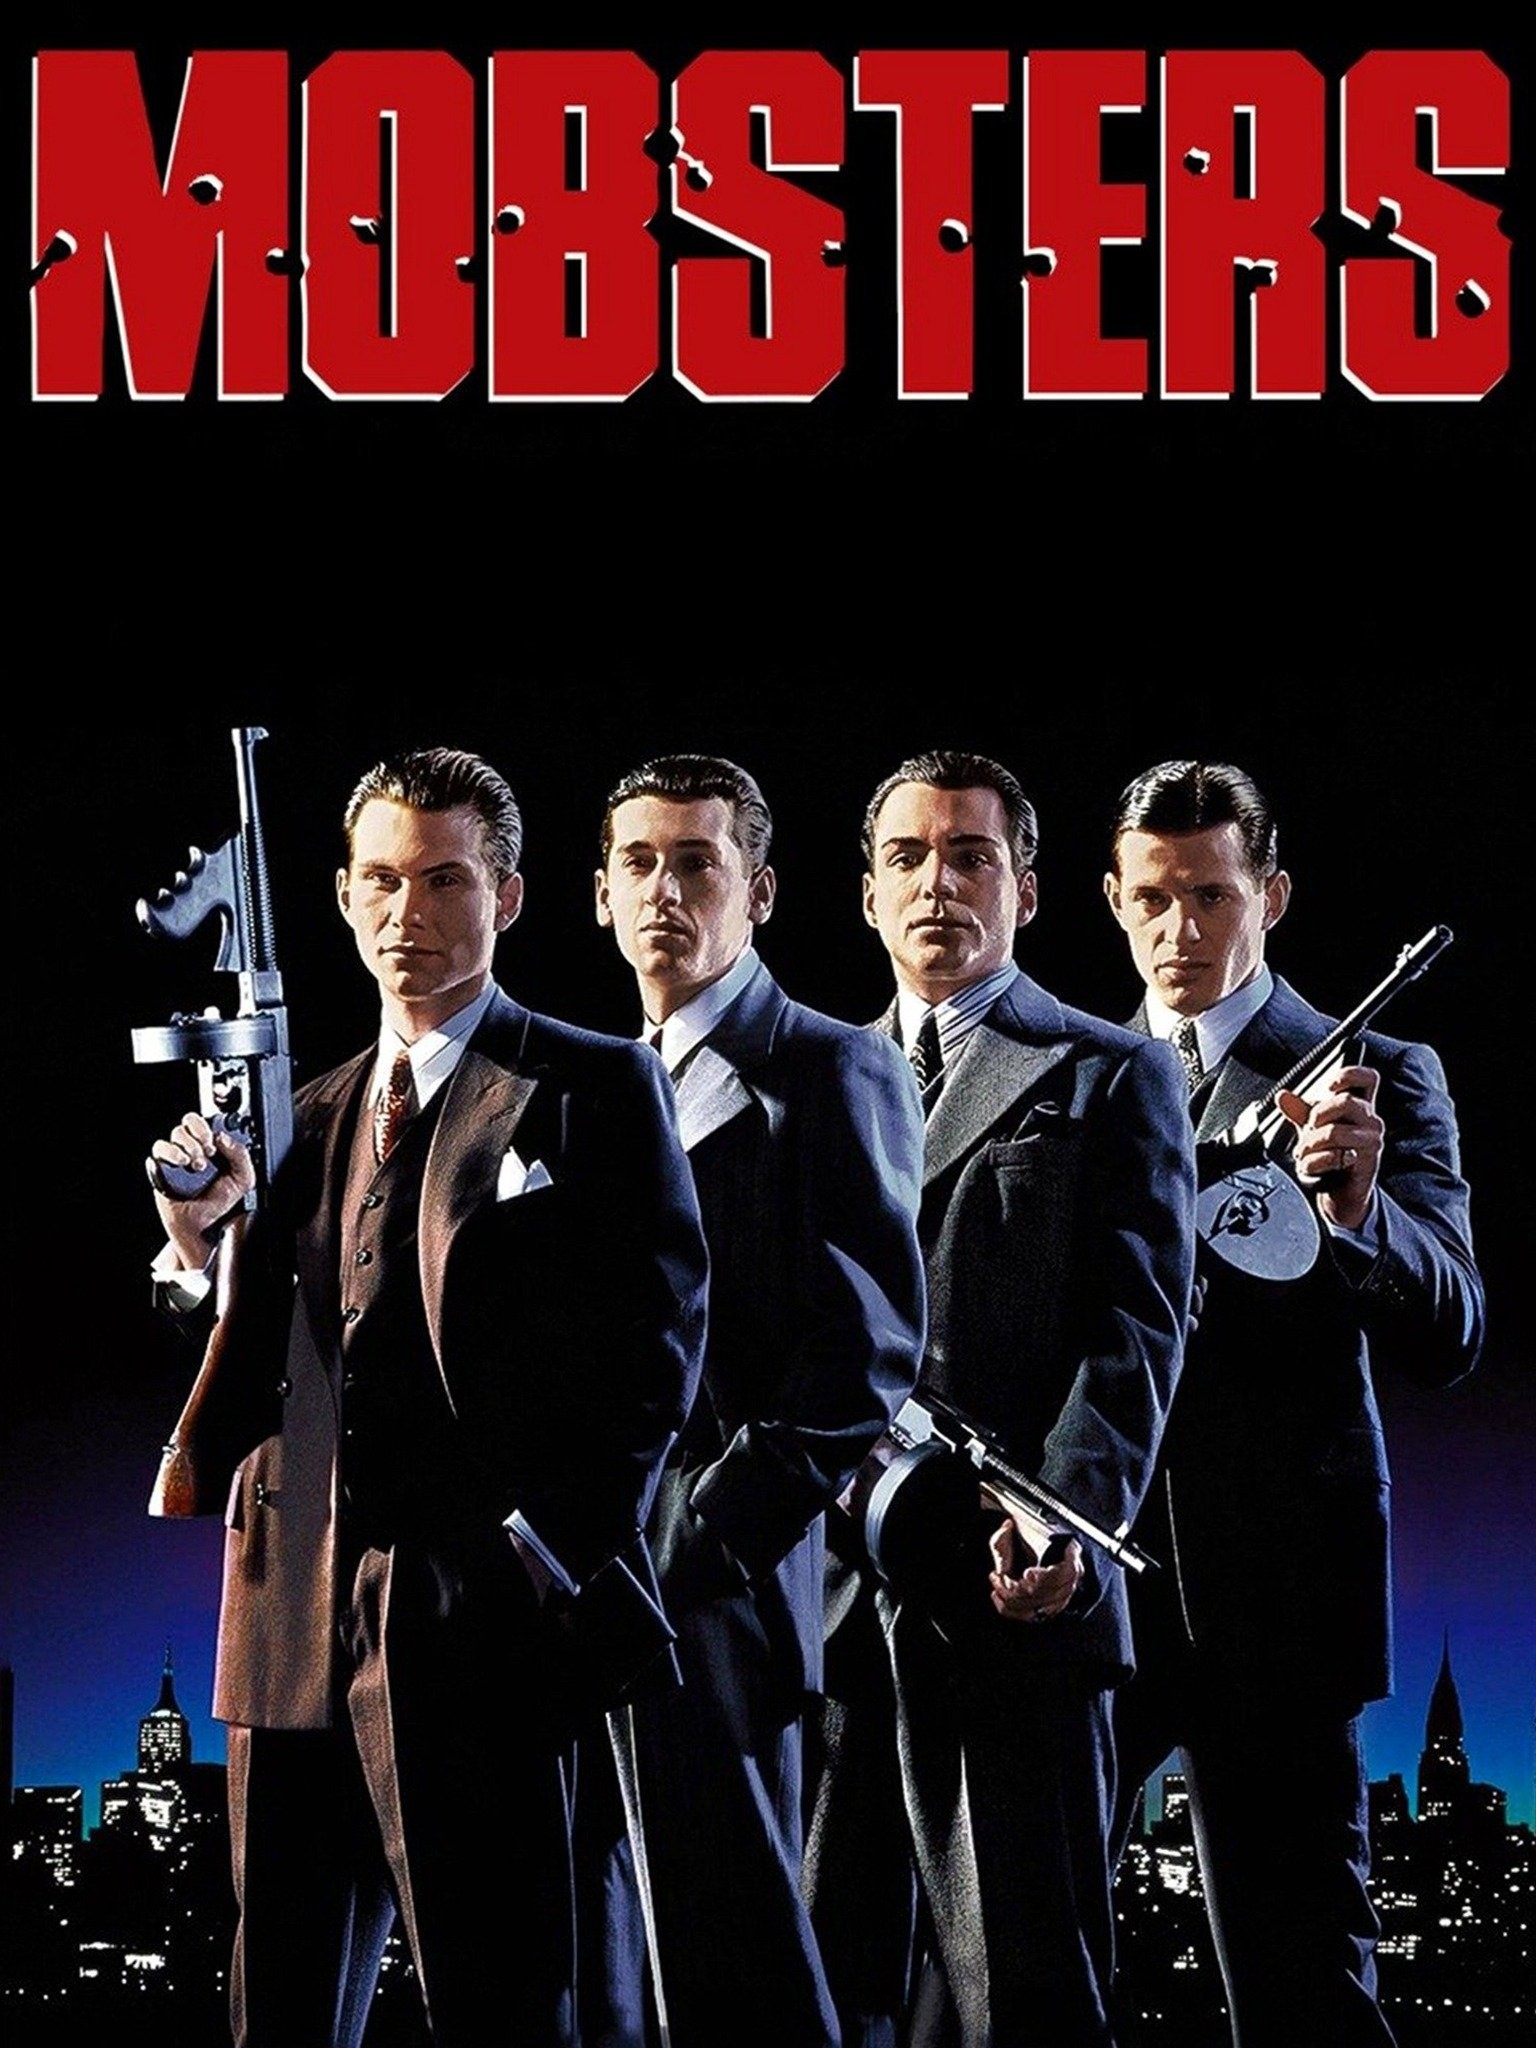 Recommend some mobster movies | Page 3 | Movie/TV Board